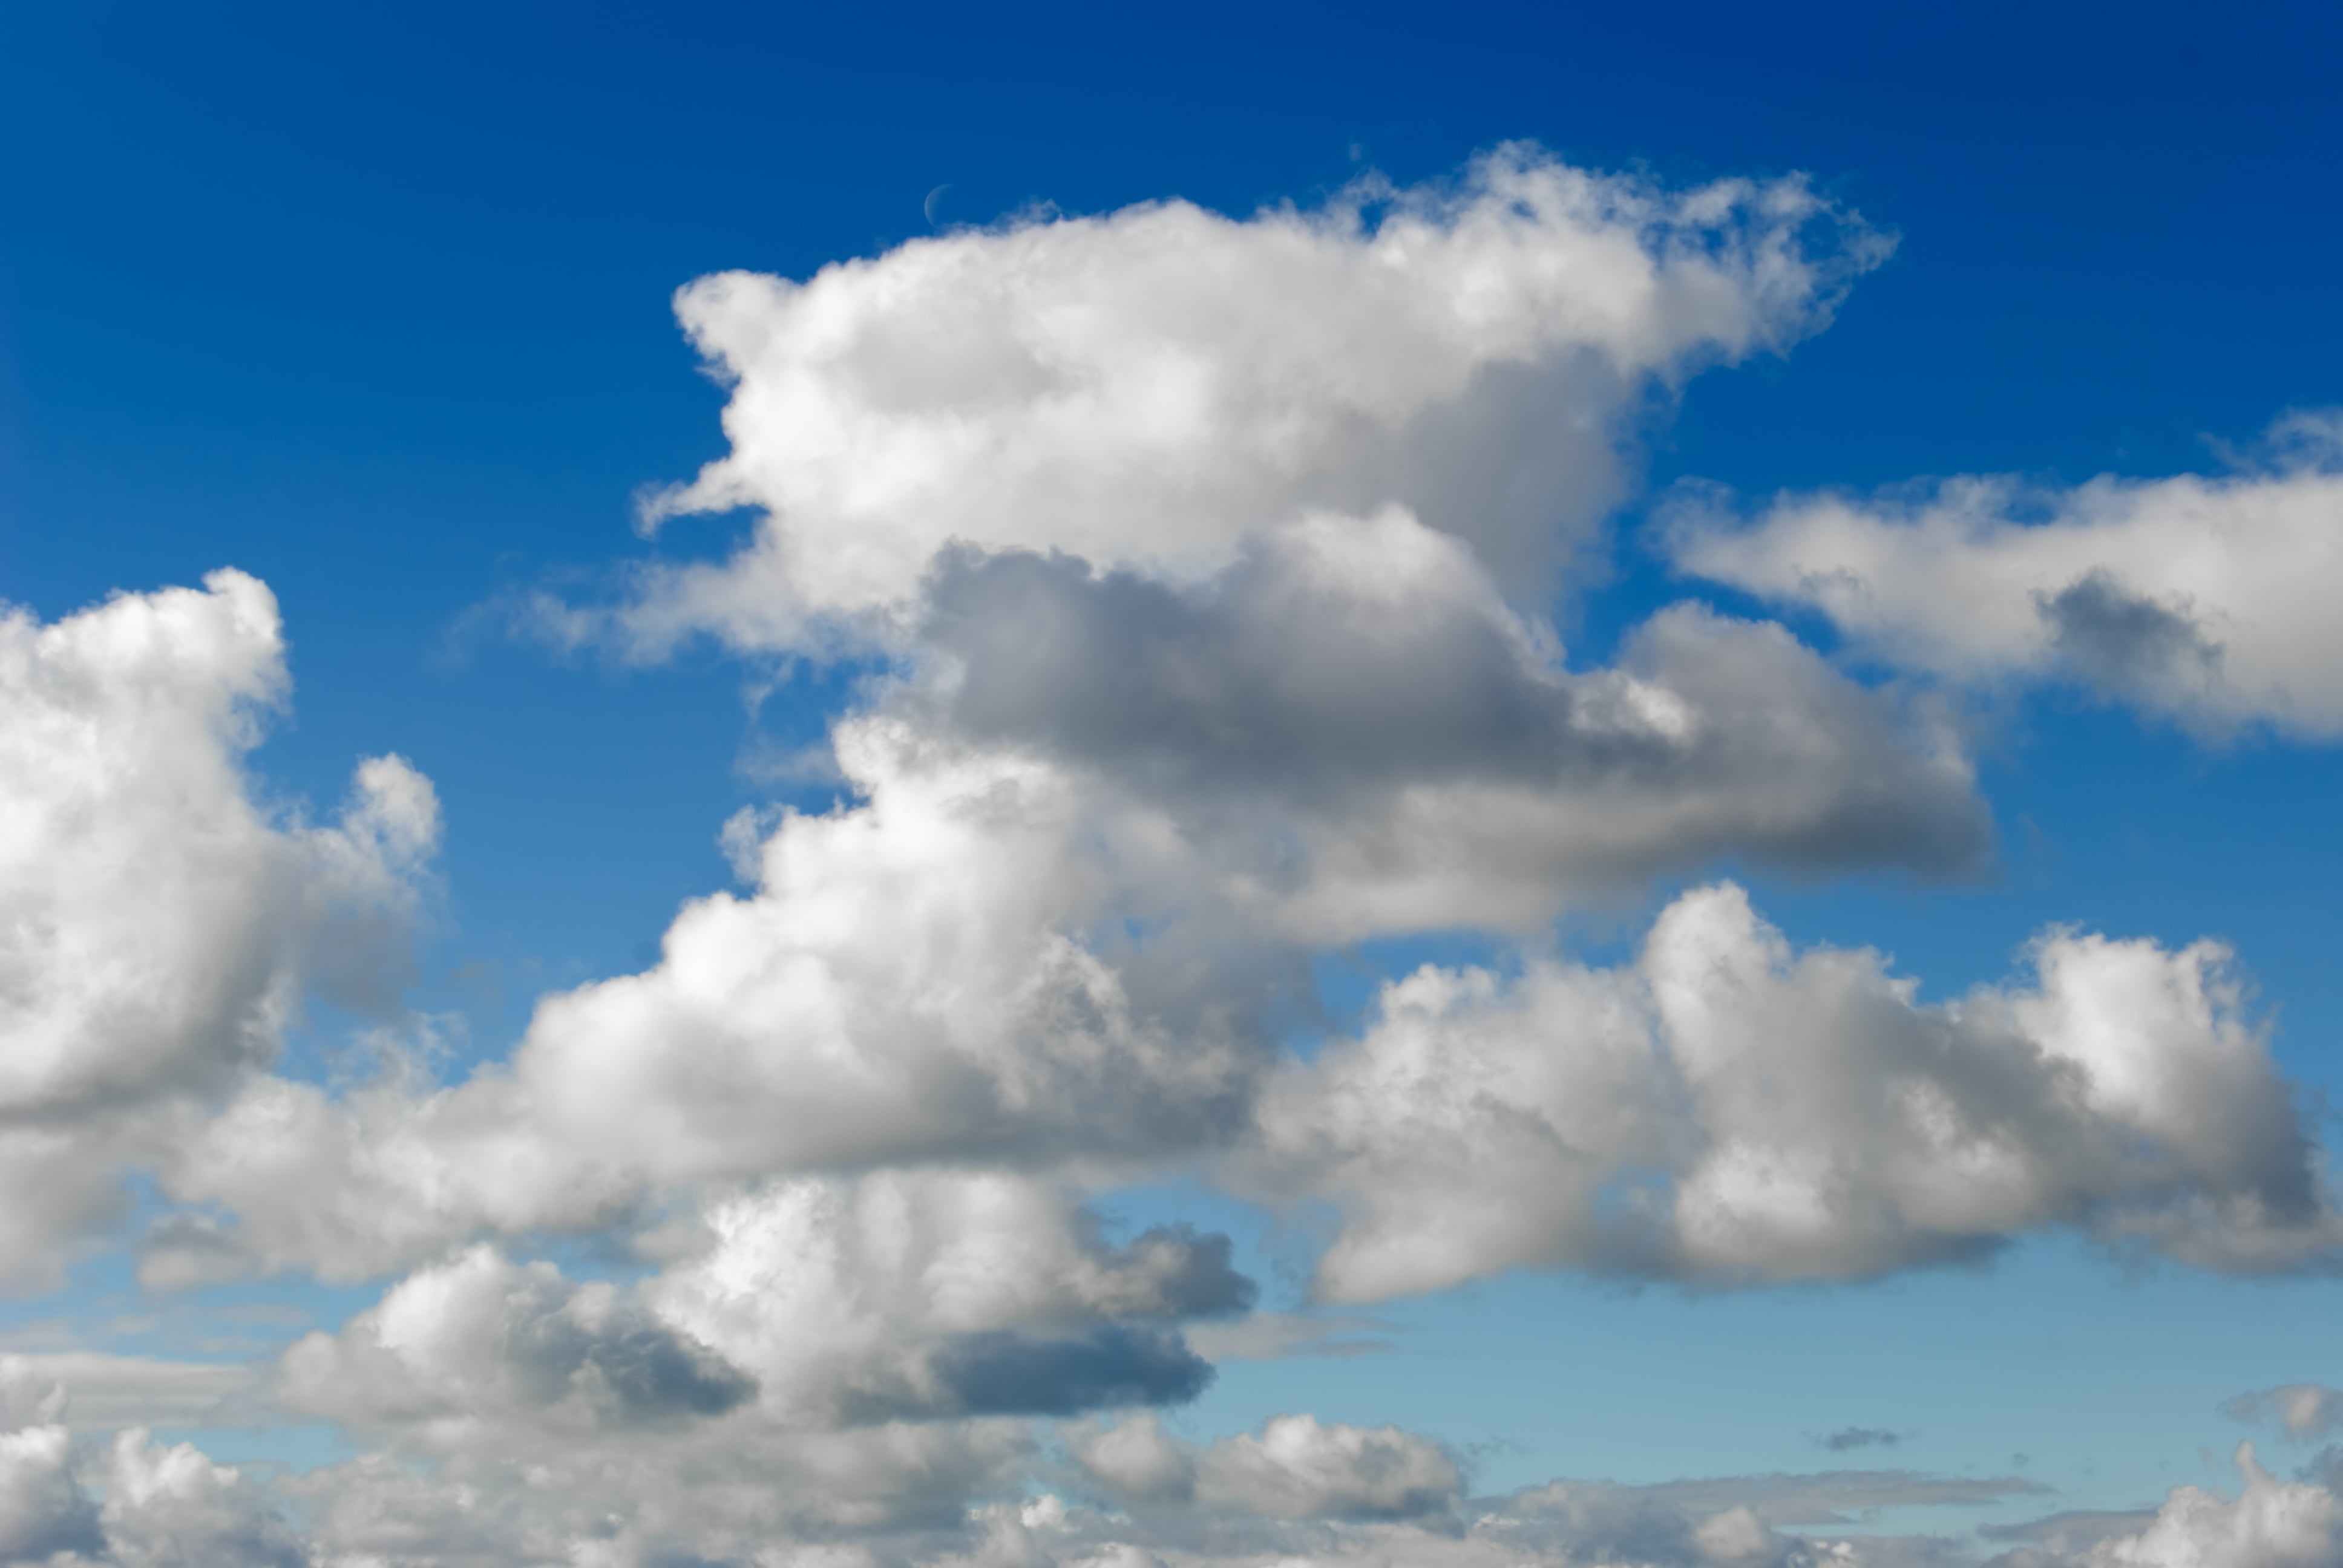 US Small, Medium Businesses Show Interest in the Cloud